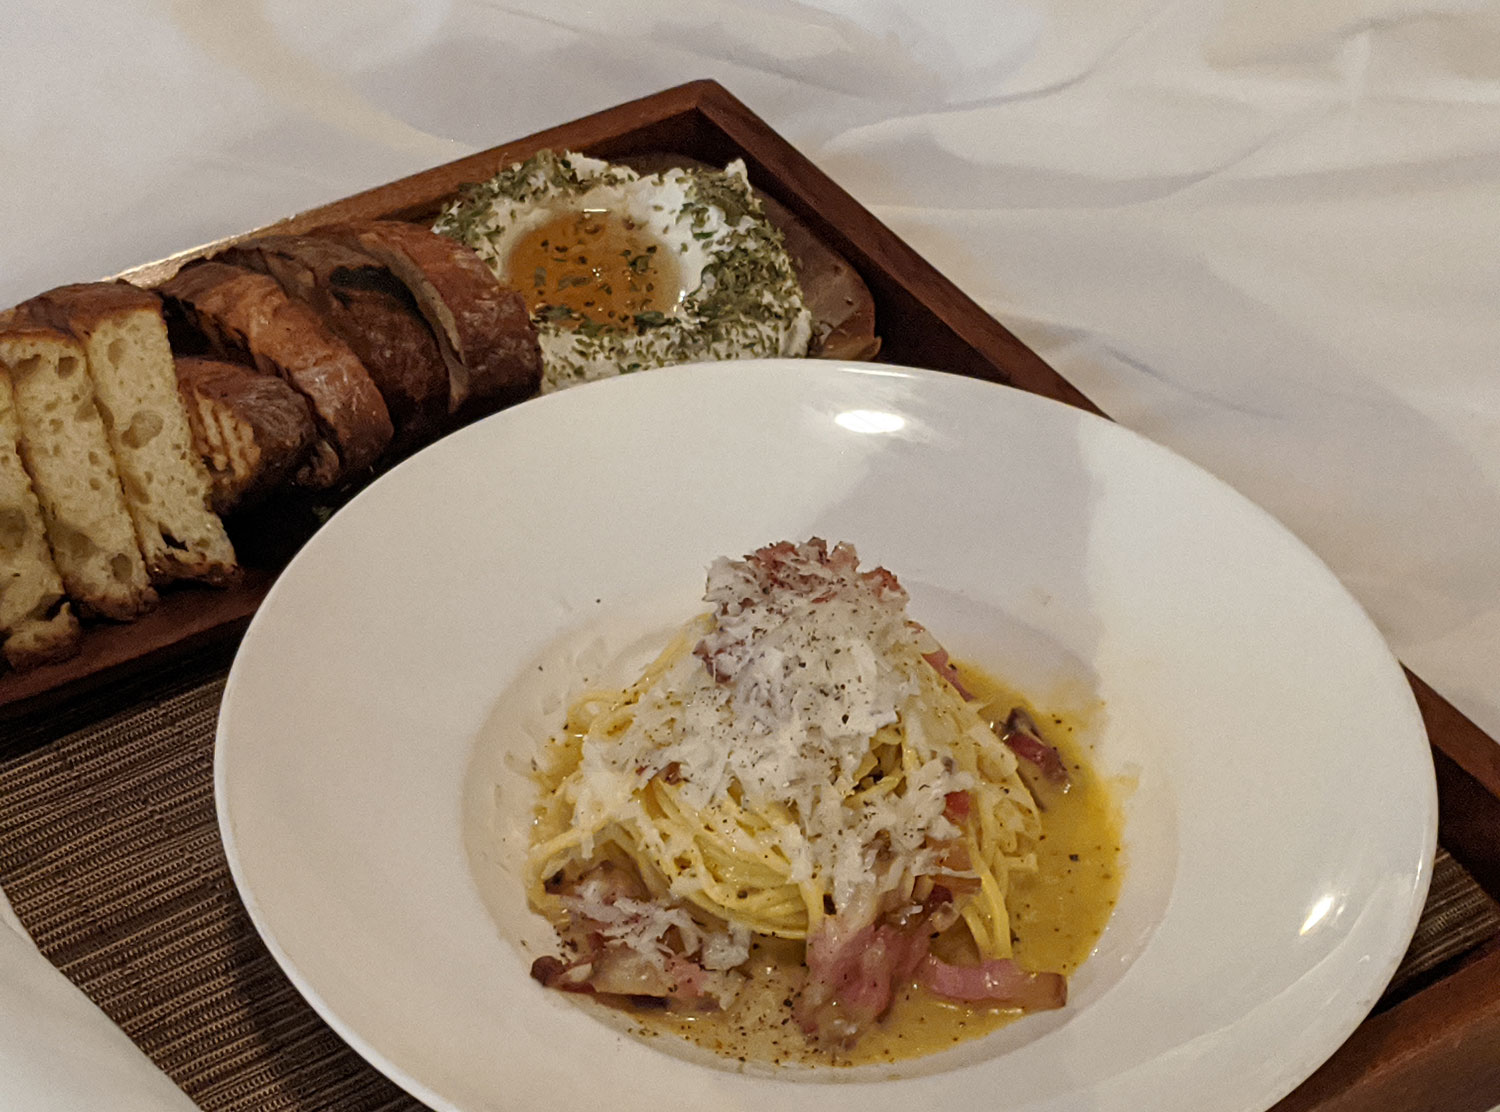 The Greenwich Hotel Room service from Locanda Verde - traditional carbonara with whipped ricotta and honey on the side.